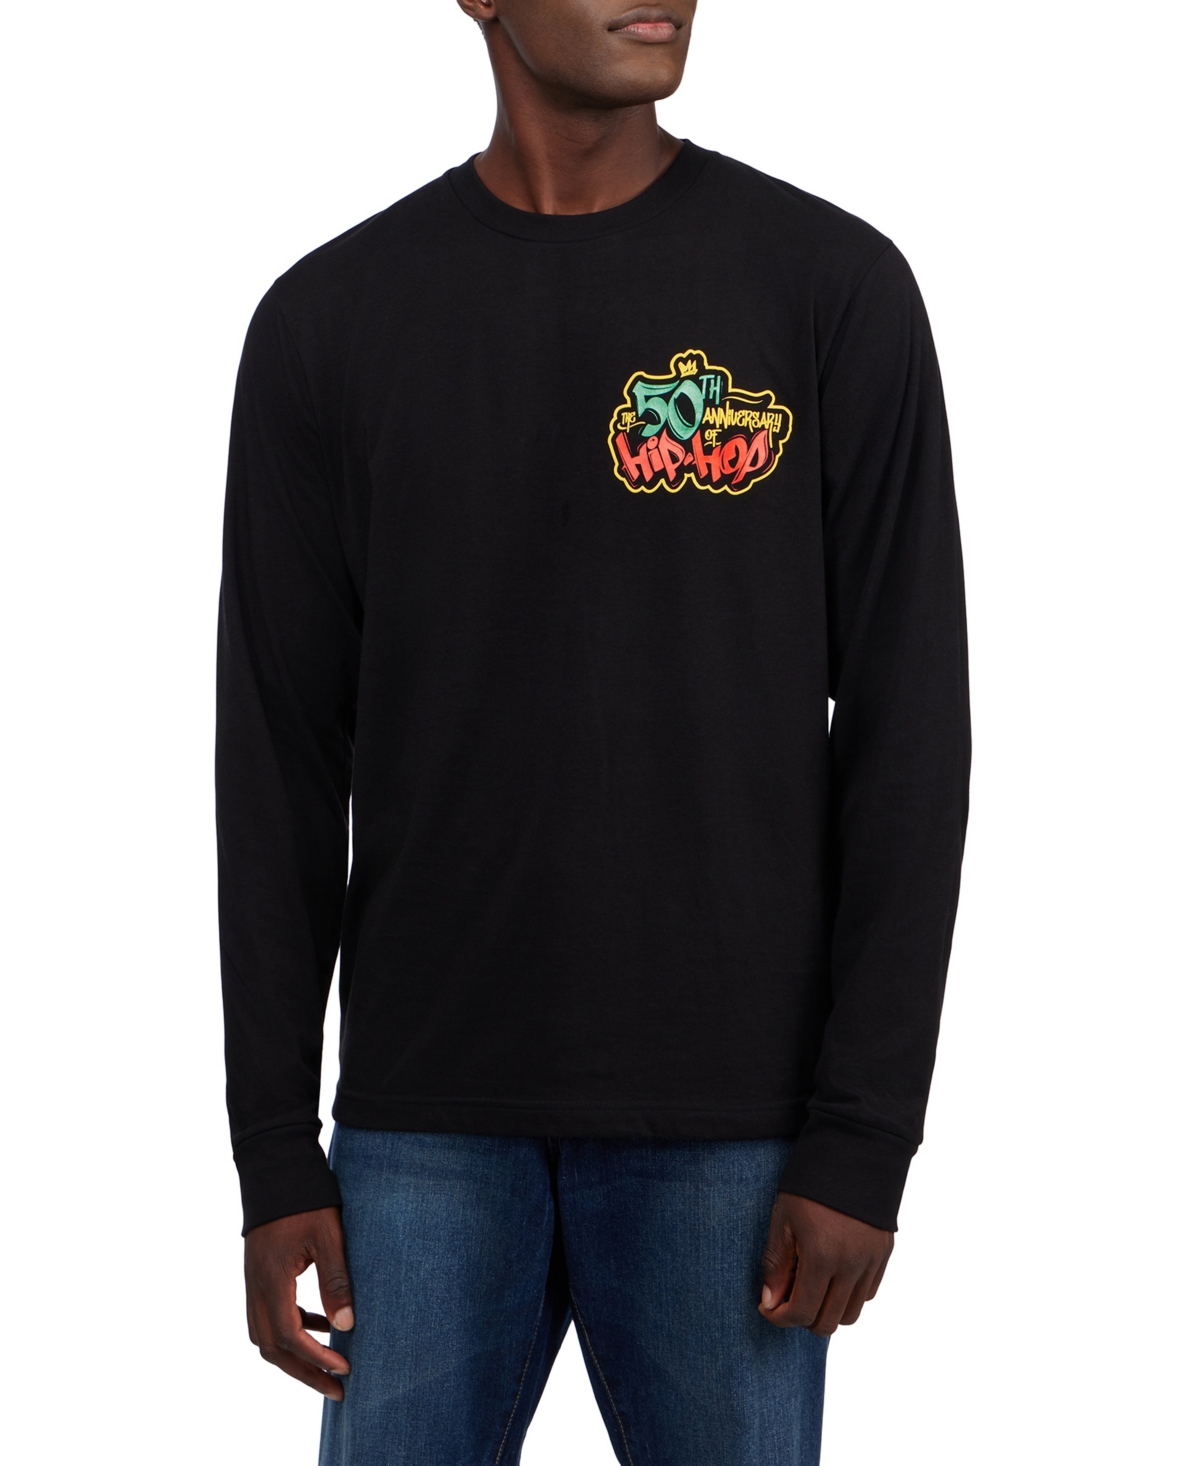 Thread Collective 50 Year Anniversary Of Hip Hop Men's Hip Hop Is History Graphic Crewneck Long Sleeve T-shirt In Black